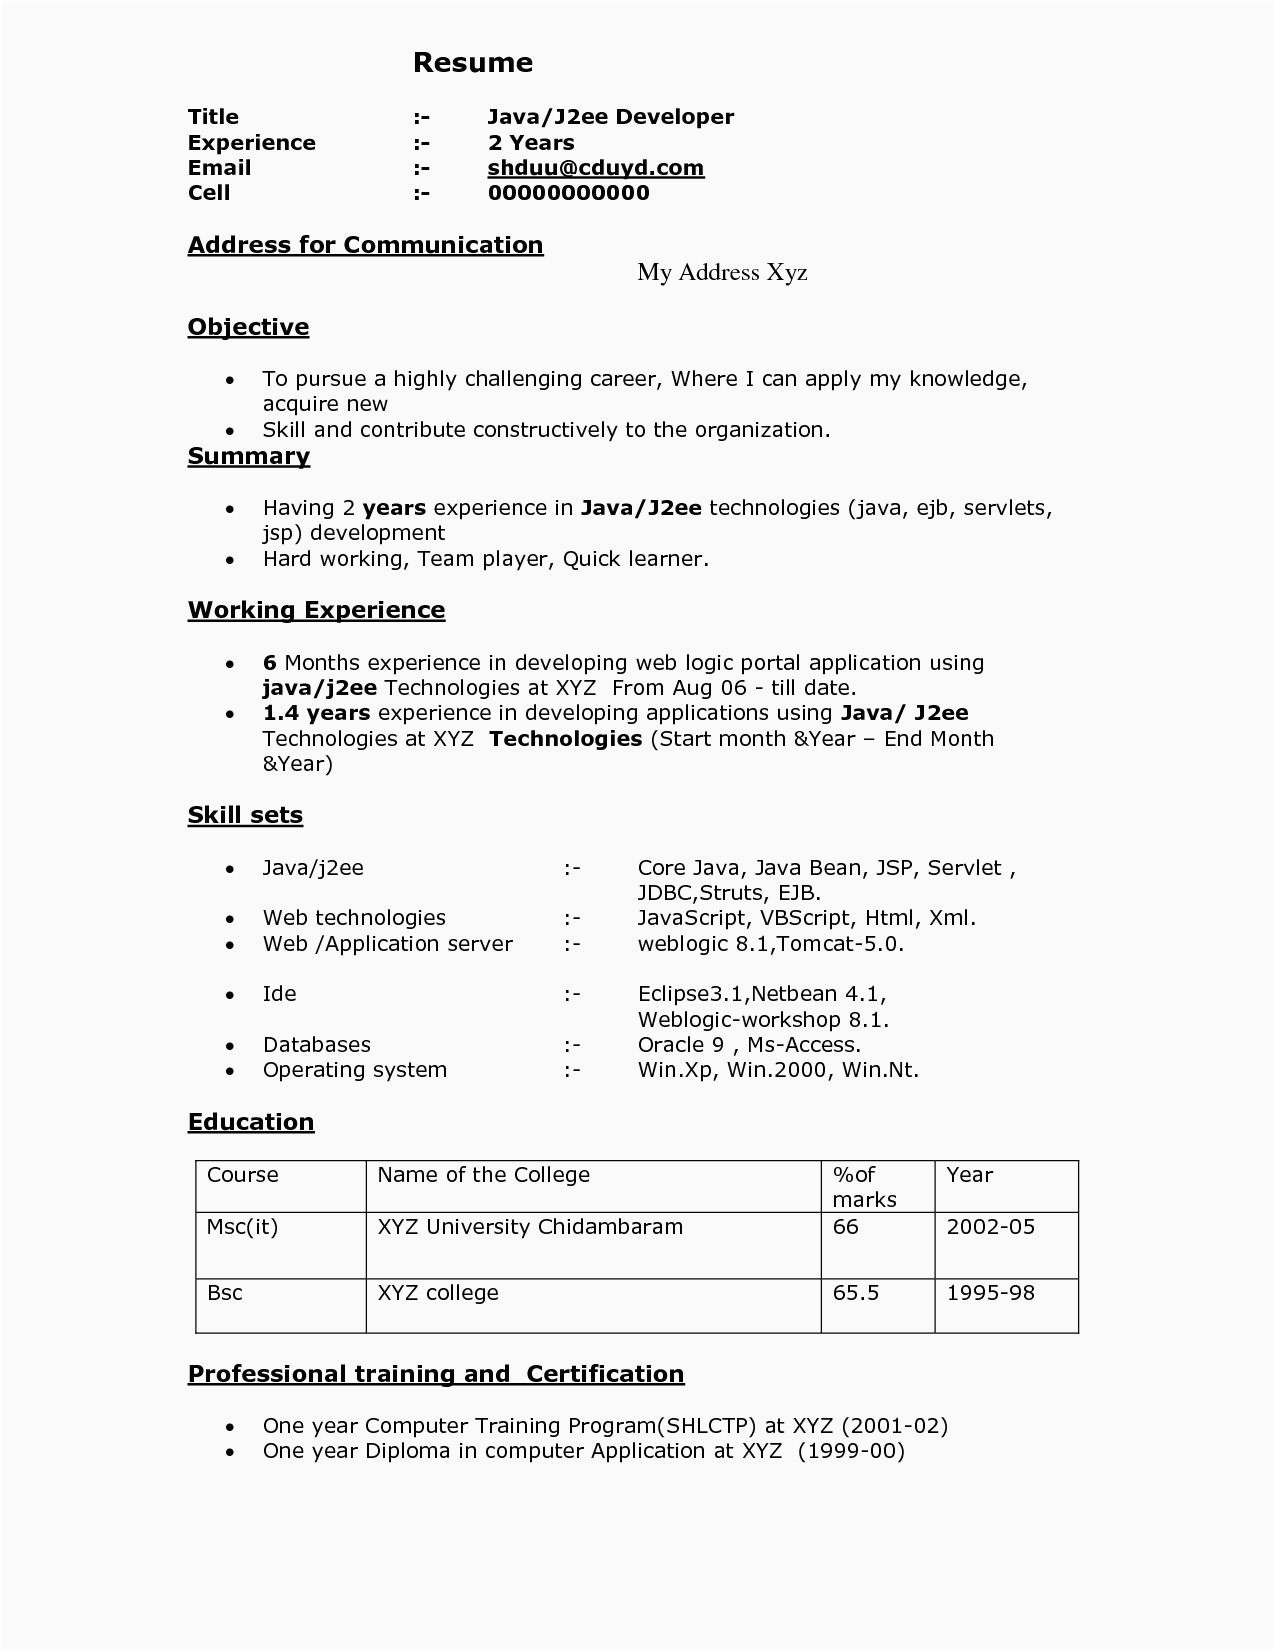 Dot Net Resumes 3 Years Experience Sample asp Net 1 Year Experience Resume Resume for 1 Year